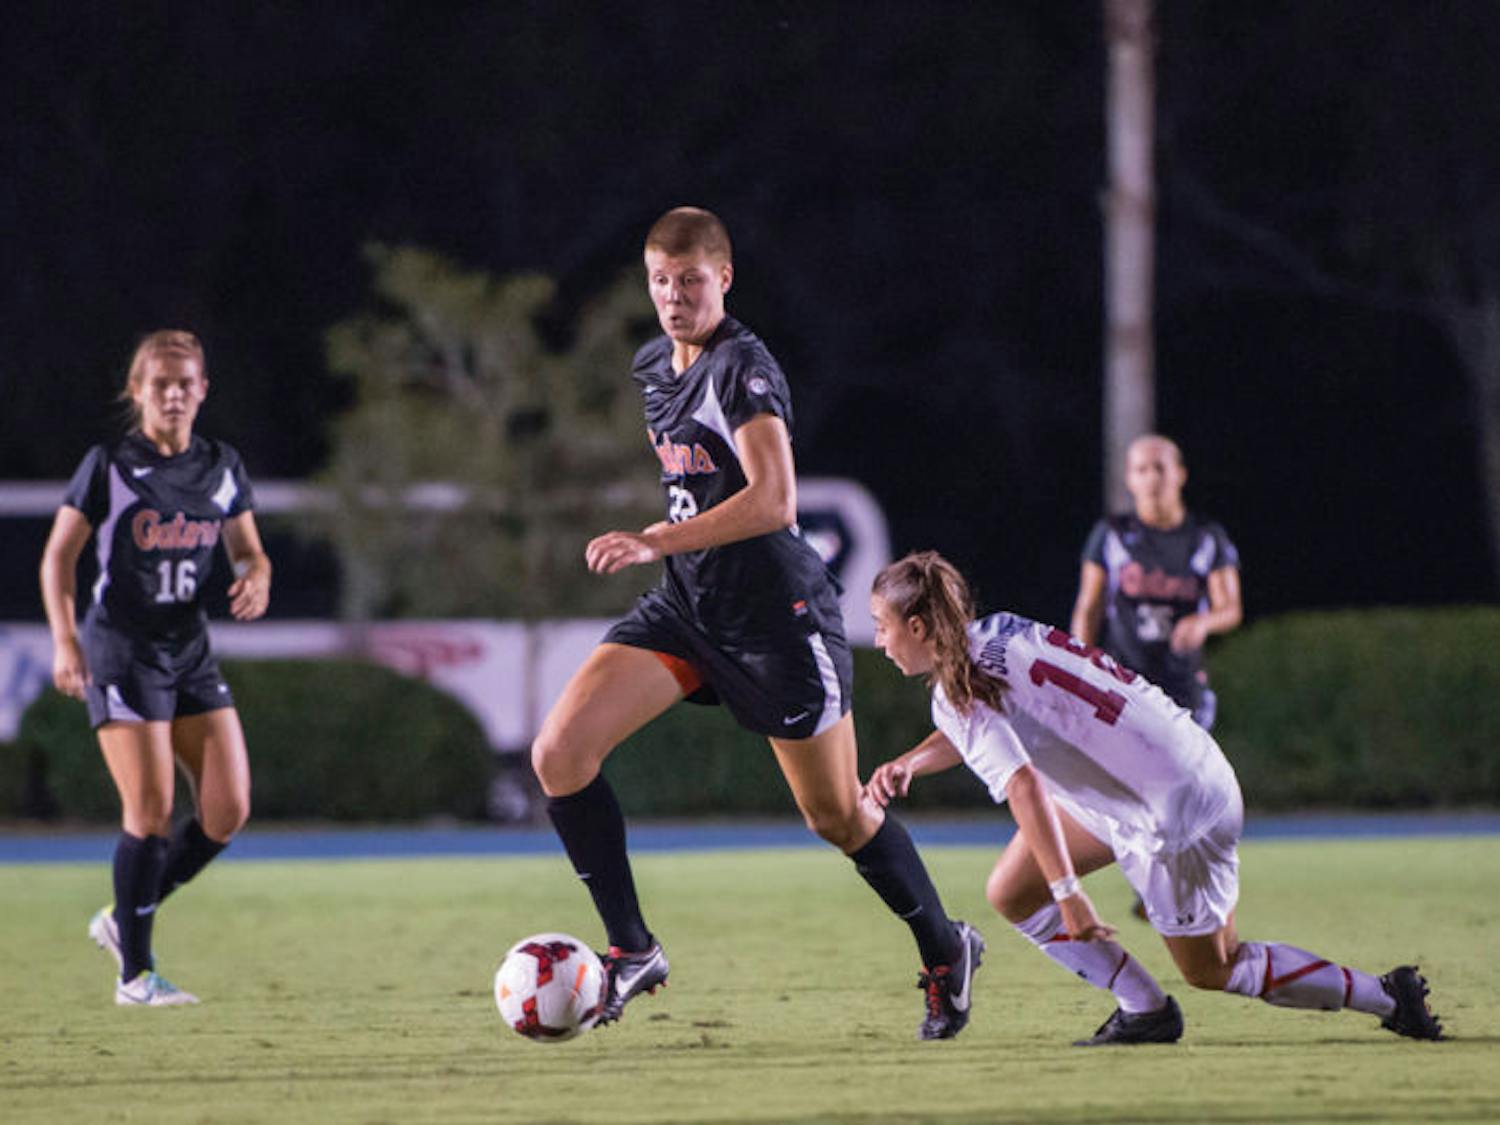 Pamela Begic dribbles the ball during Florida’s 2-1 loss against South Carolina on Friday at James G. Pressly Stadium. Begic left Sunday’s game due to an unspecified injury.